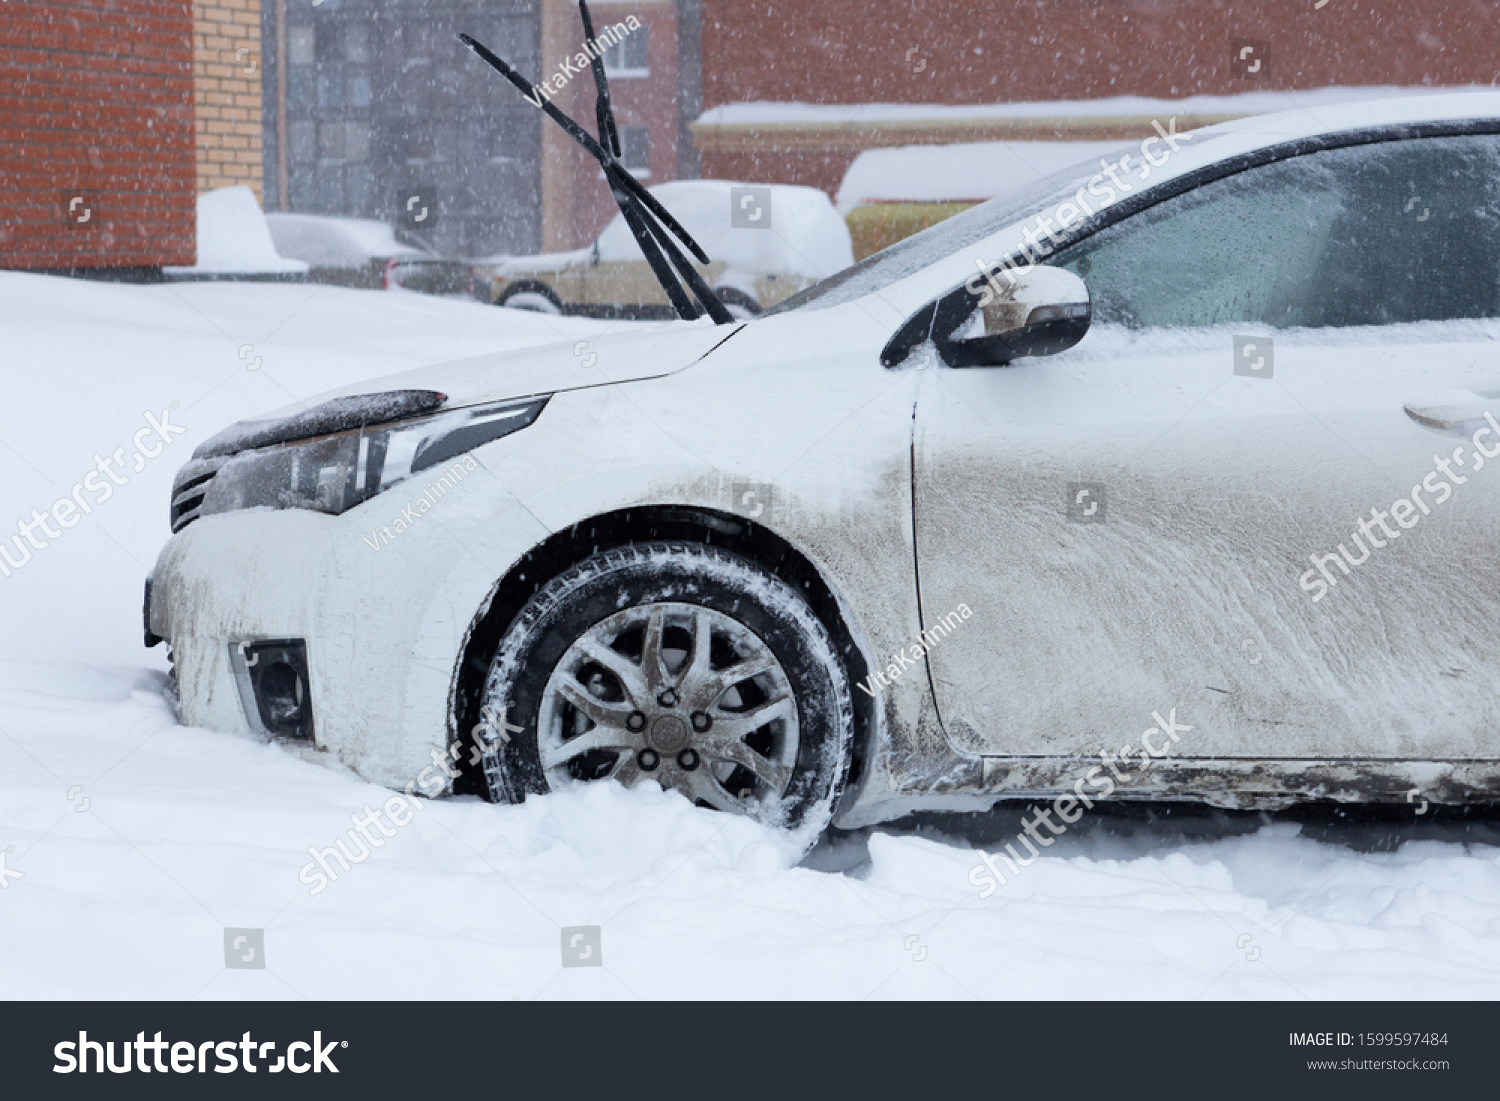 Novosibirsk, Novosibirskaya oblast/ russian federation - 12/15/2019: The front of a white car covered in mud and snow on a snowy day. #1599597484